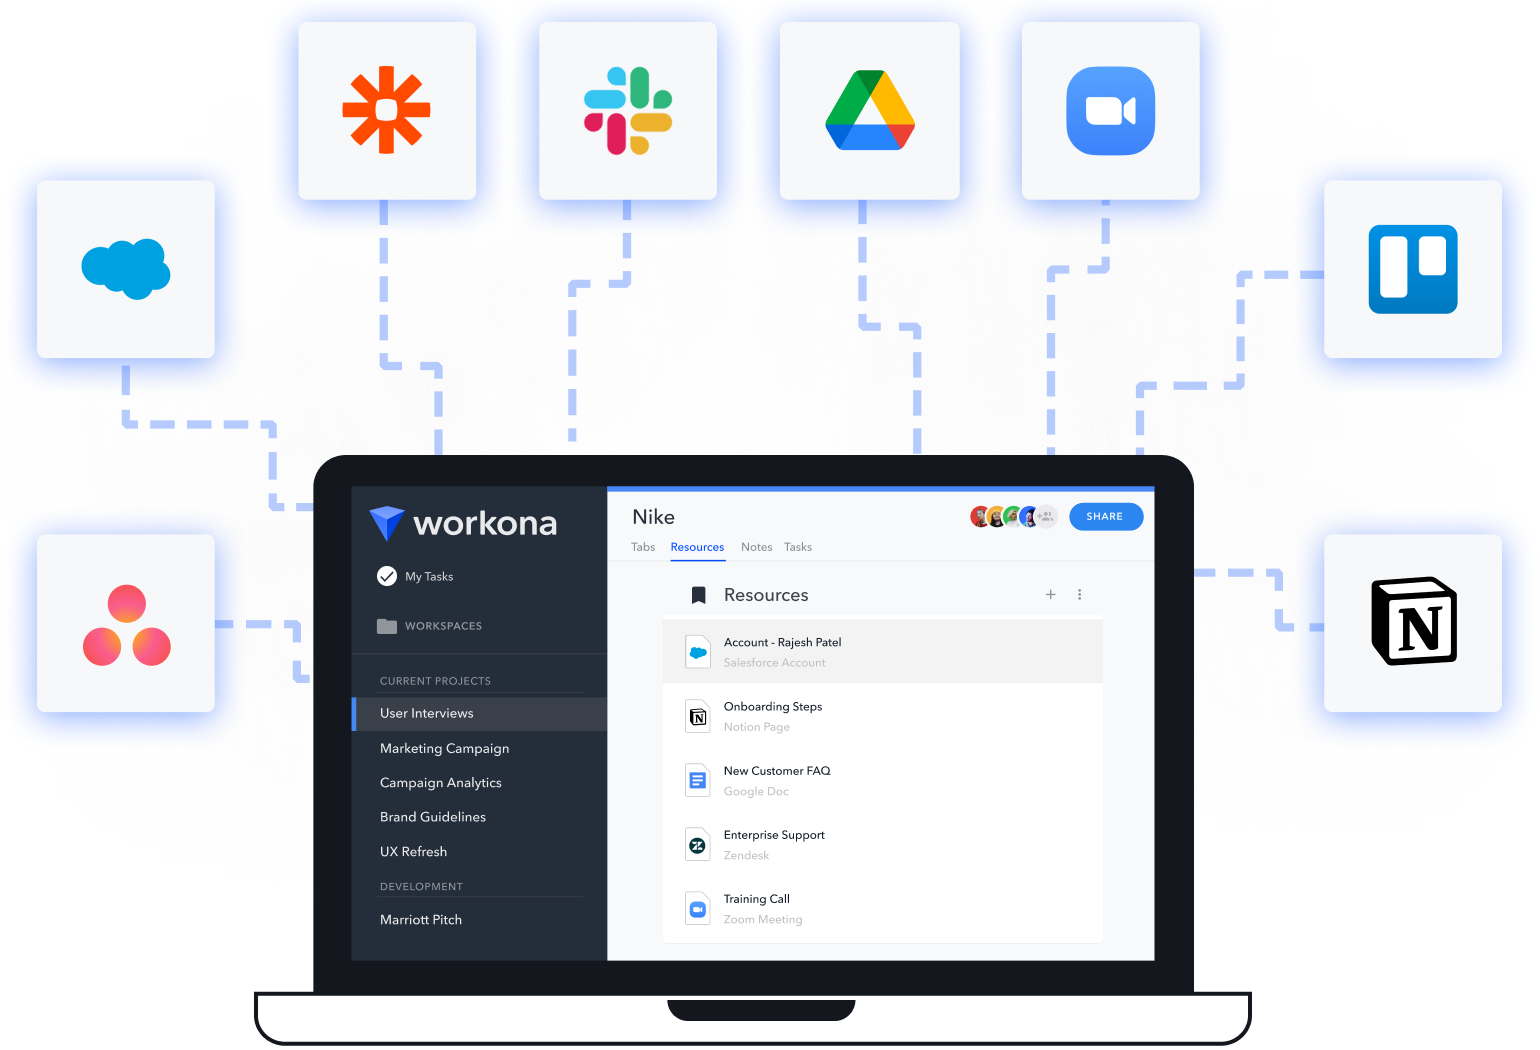 Workona connected to various cloud applications